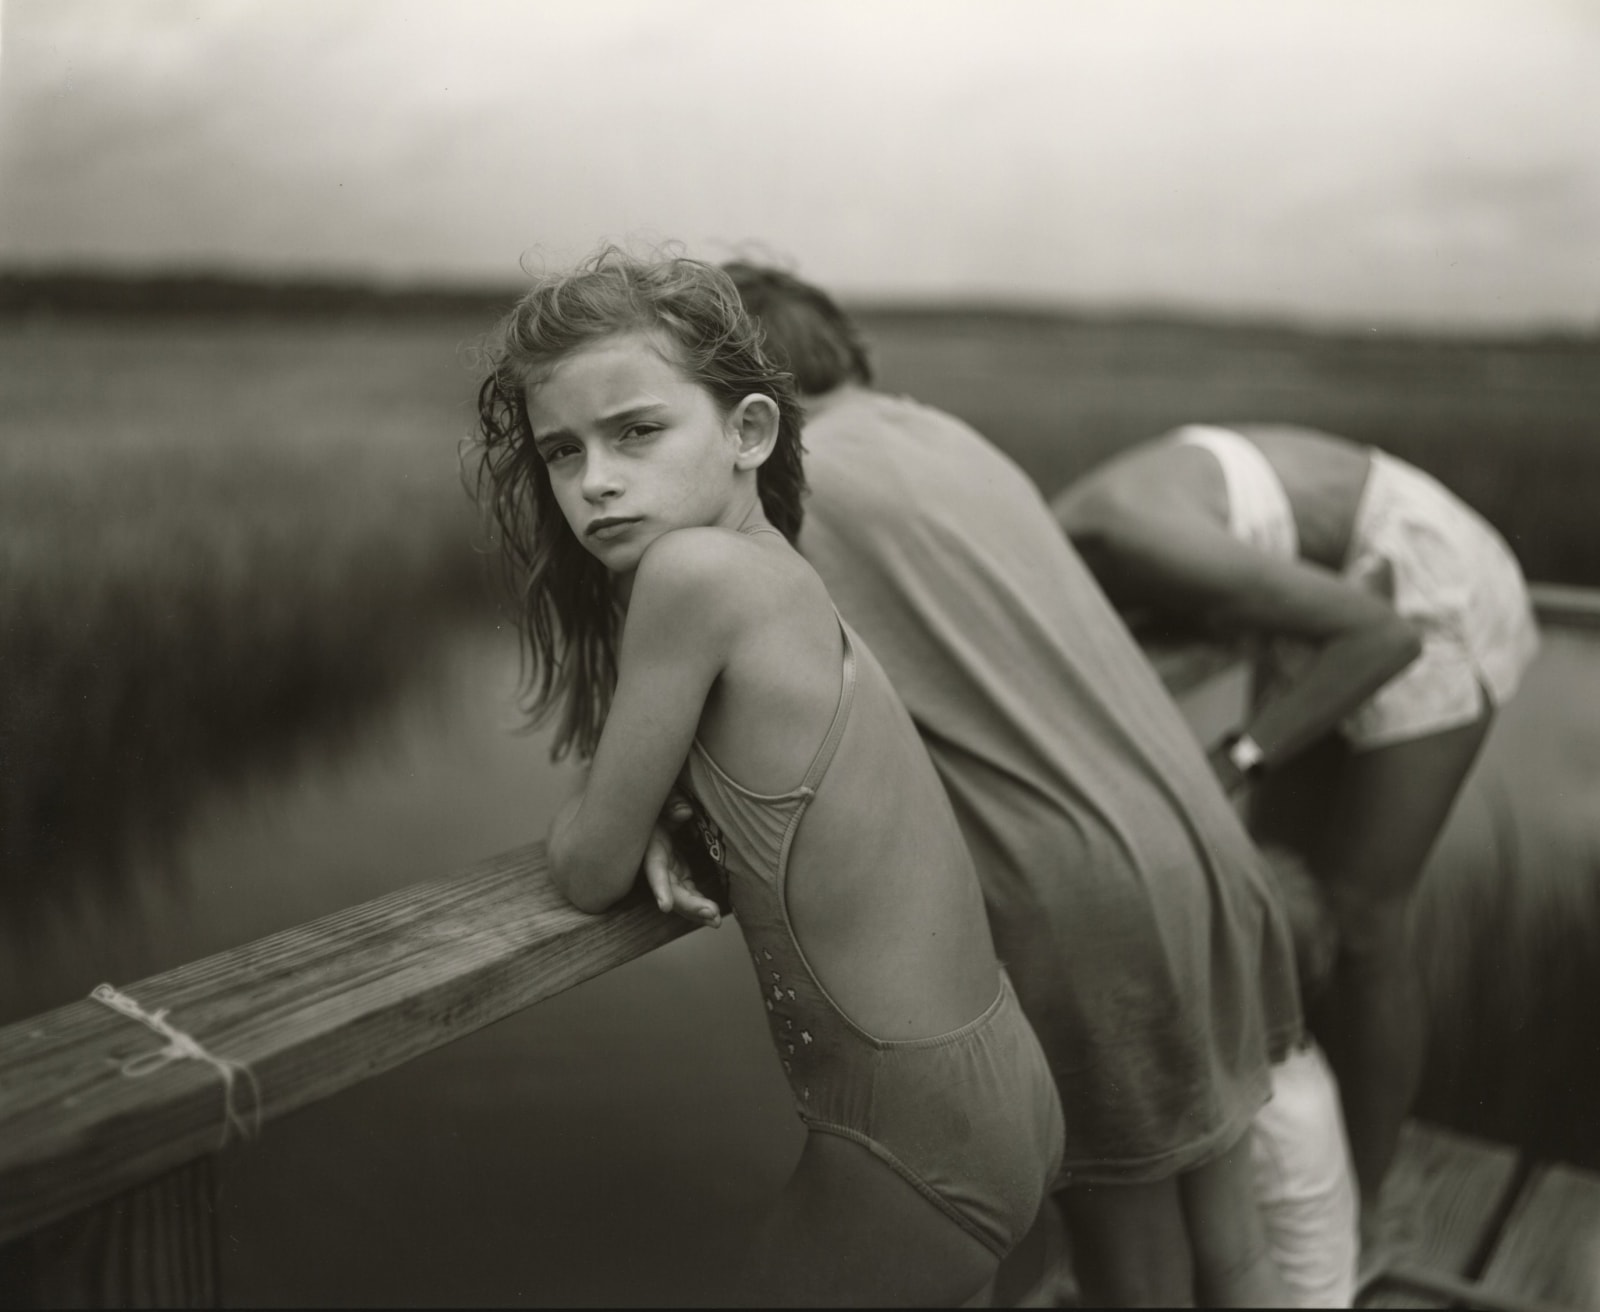 young girl in bathing suit leaning over lake fence, hair blowing in wind, by Sally Mann from the Immediate Family series